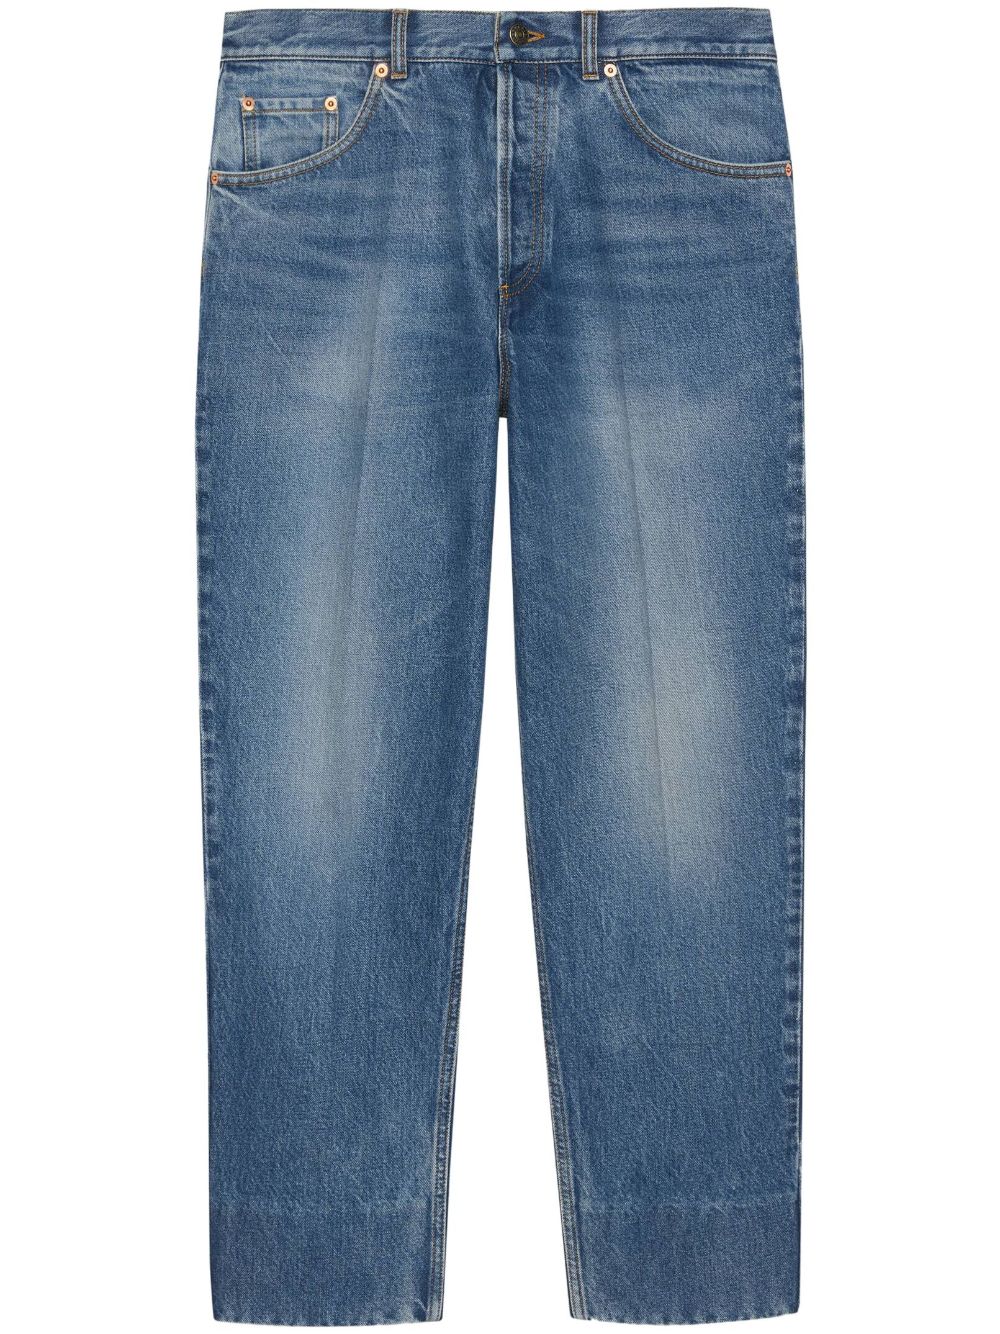 GUCCI STRAIGHT-LEG WASHED JEANS